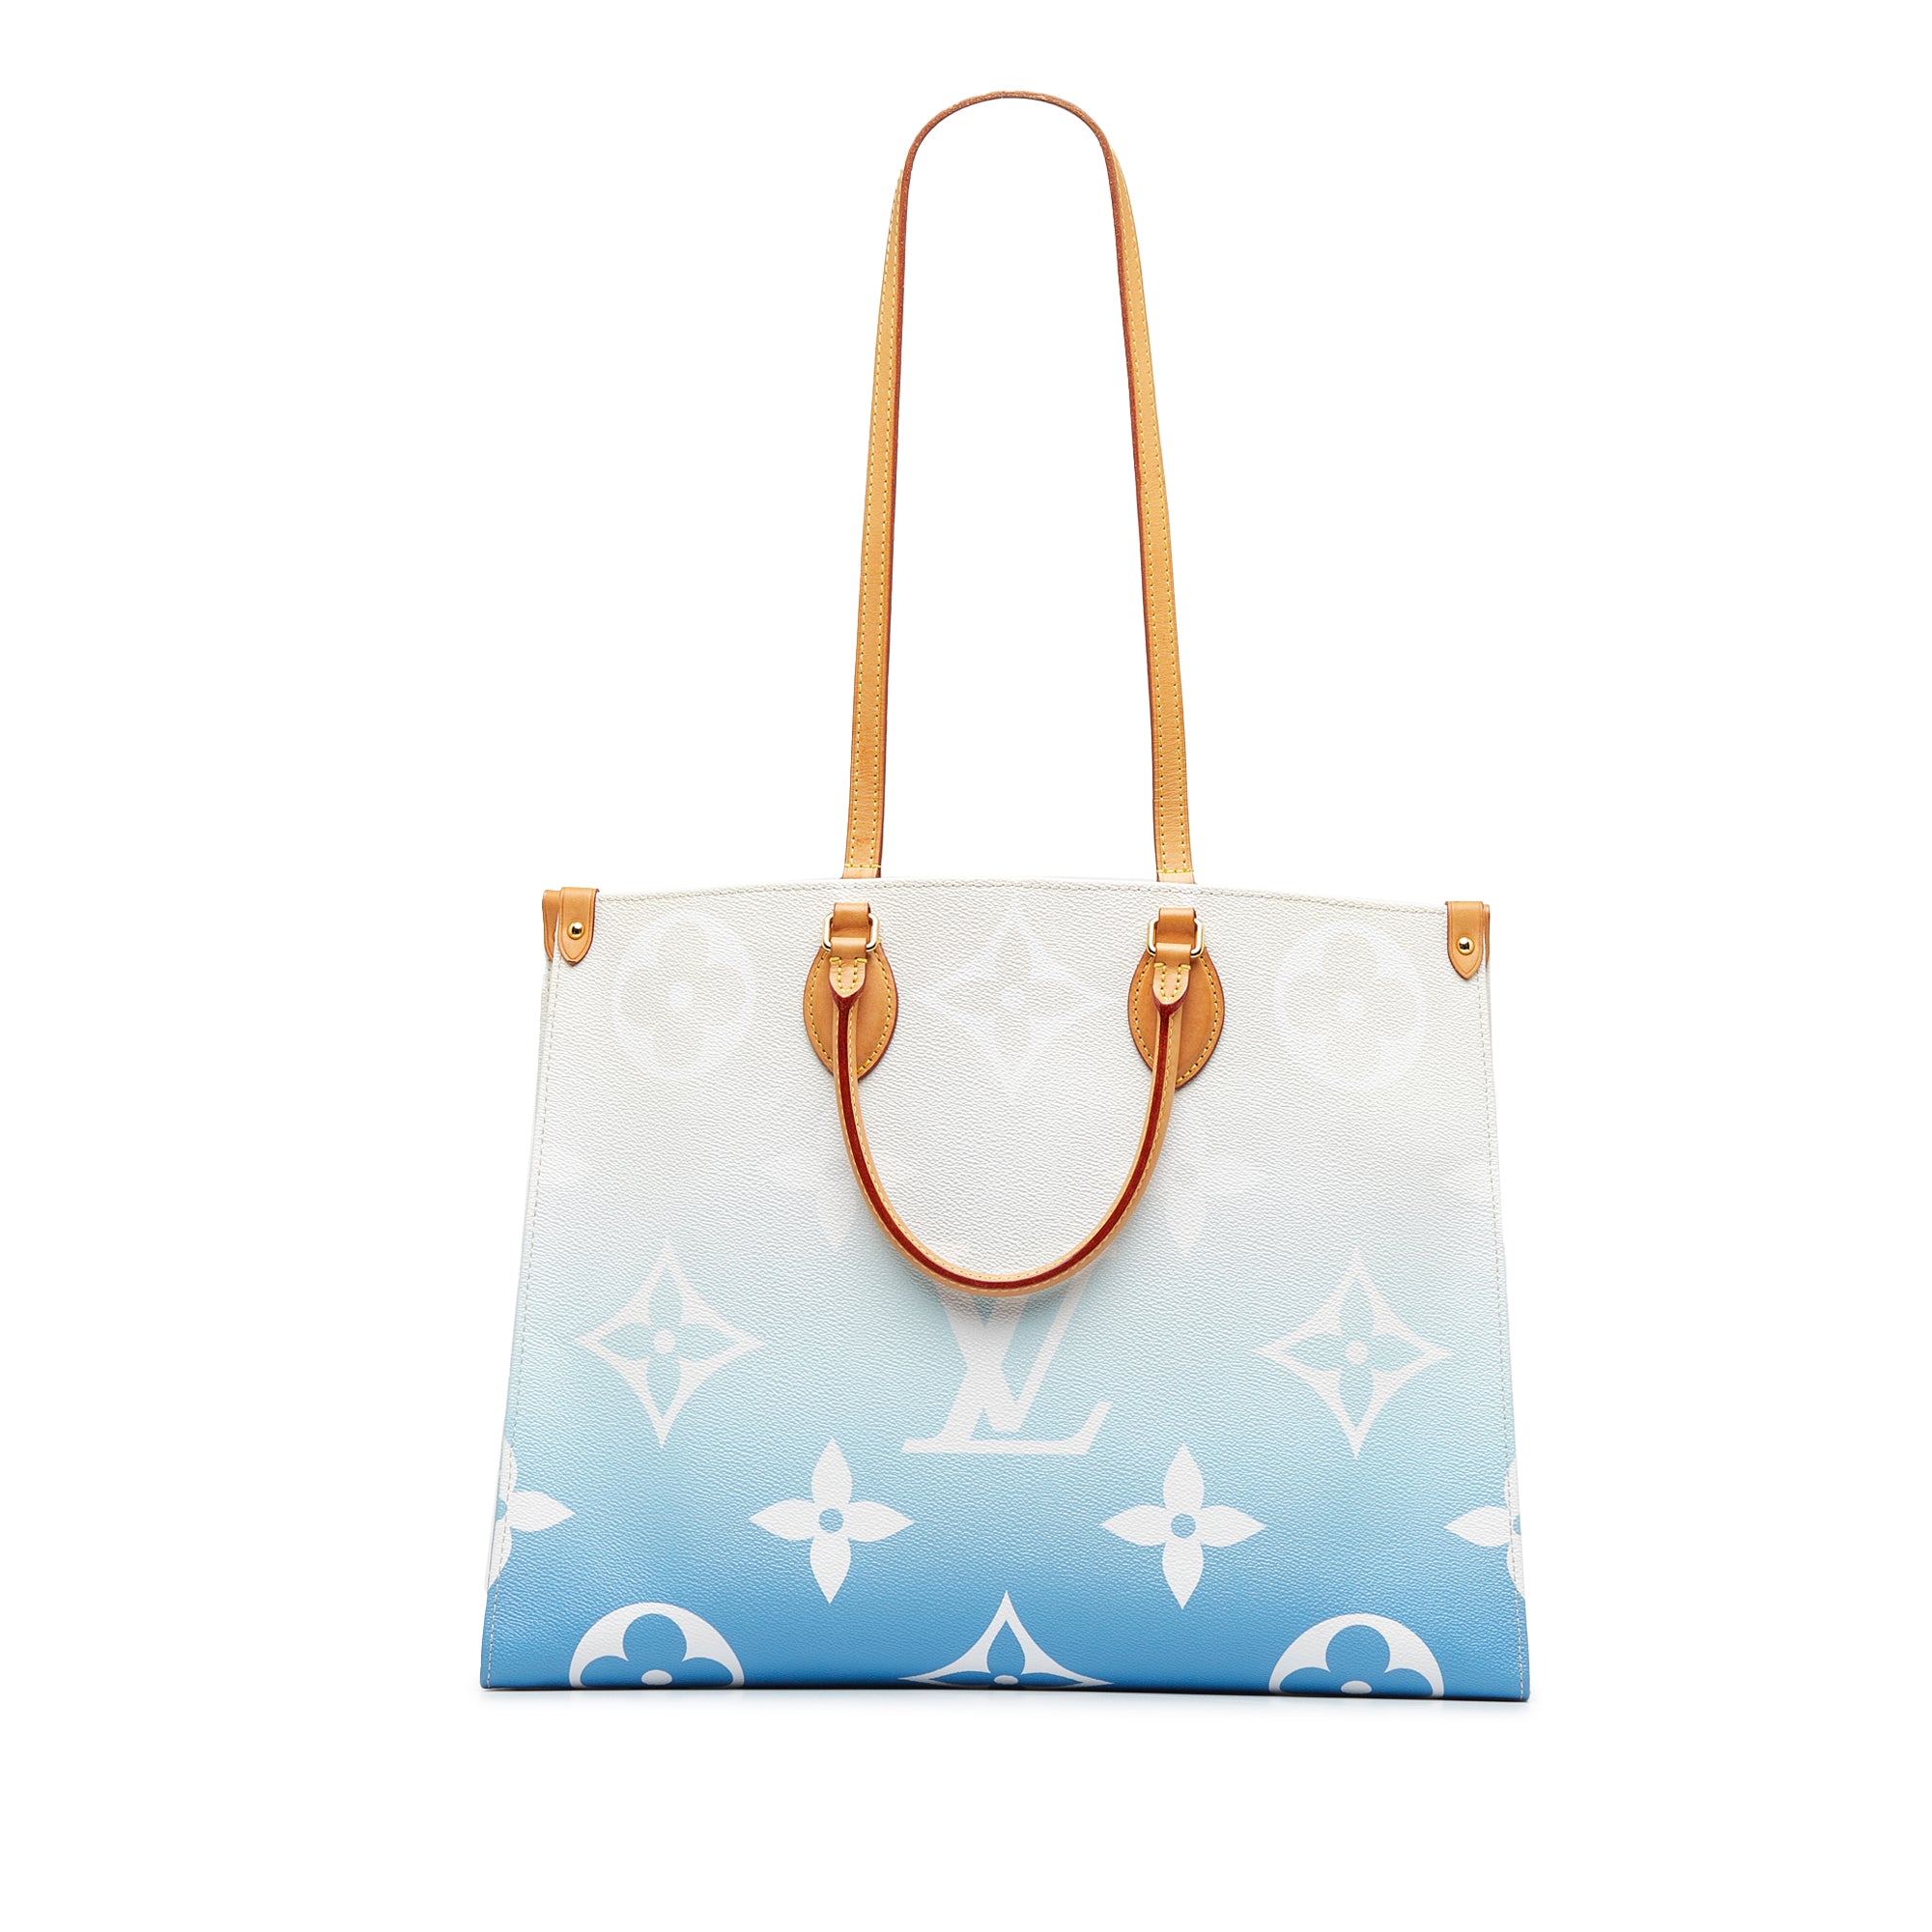 Louis Vuitton Blue Giant Monogram Coated Canvas By The Pool